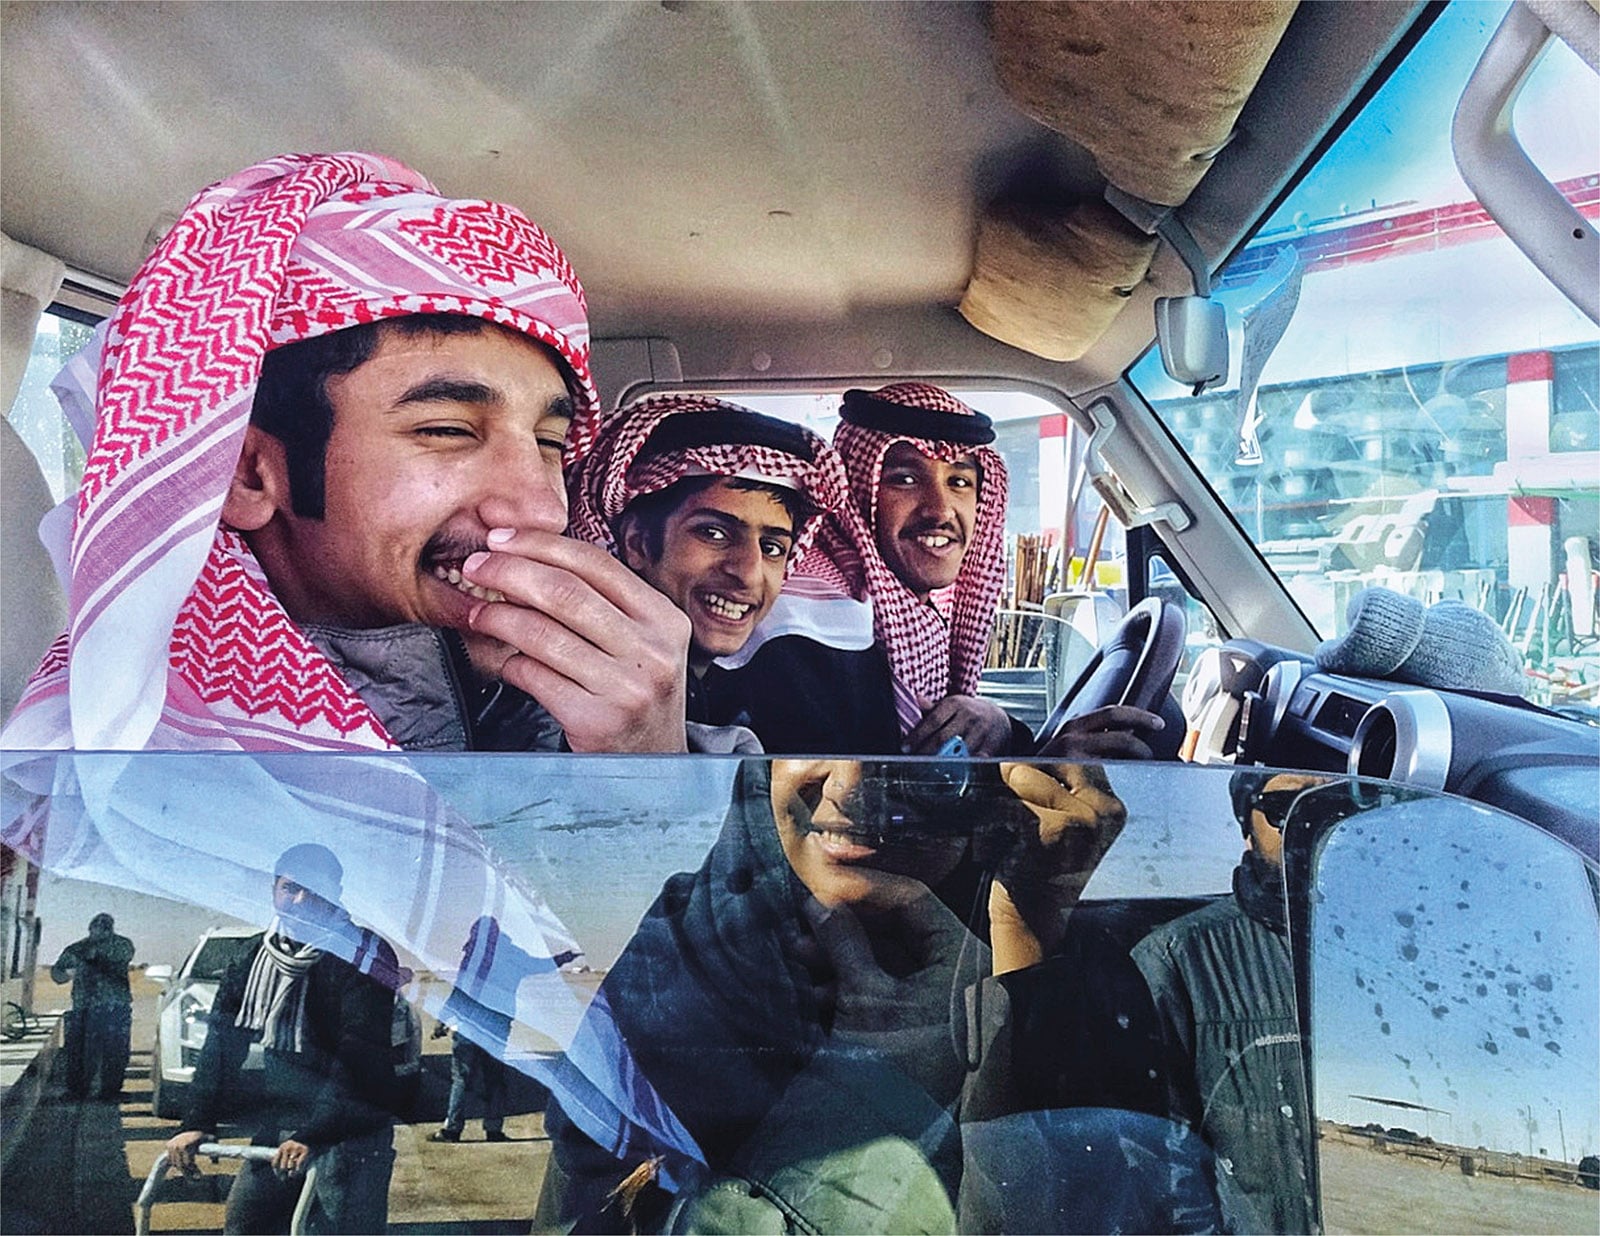 This image was taken when a couple of other photographers and myself attended the King Abdulaziz Camel Festival in 2018 in al-Rumahiyah, Saudi Arabia. We stopped in the middle of the desert to get some gas when I noticed this car of young Bedouin men. They looked like they were enjoying their journey, so I couldn’t resist. I walked up to them while taking photos until the teenager in the front felt a little embarrassed and started to laugh. I like this moment because it was real. They said they were on their way to the camel festival as well.